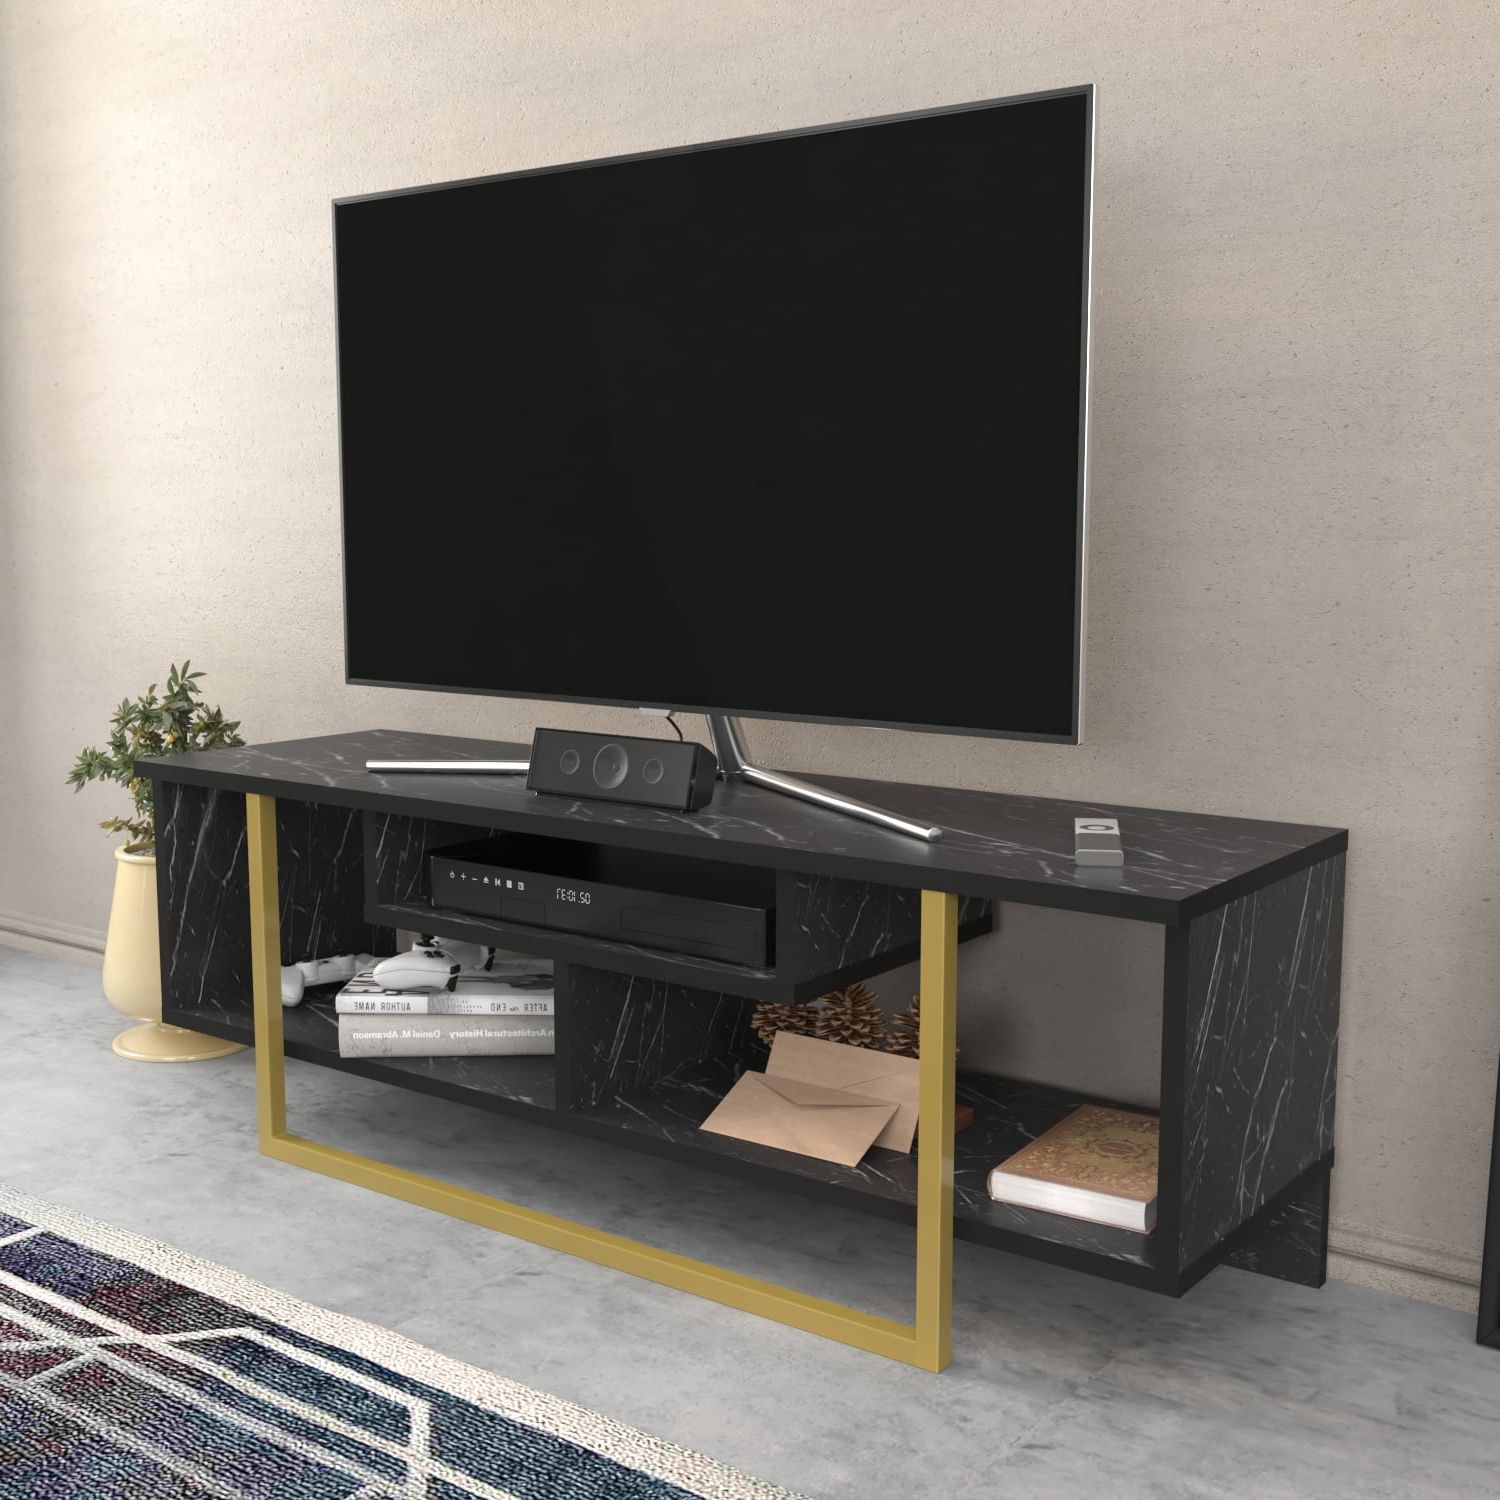 Most Popular Black Marble Tv Stands With Asal 47" Modern Metal Wood Tv Stand For 55 Inch Tv Black Marble Gold (View 4 of 15)